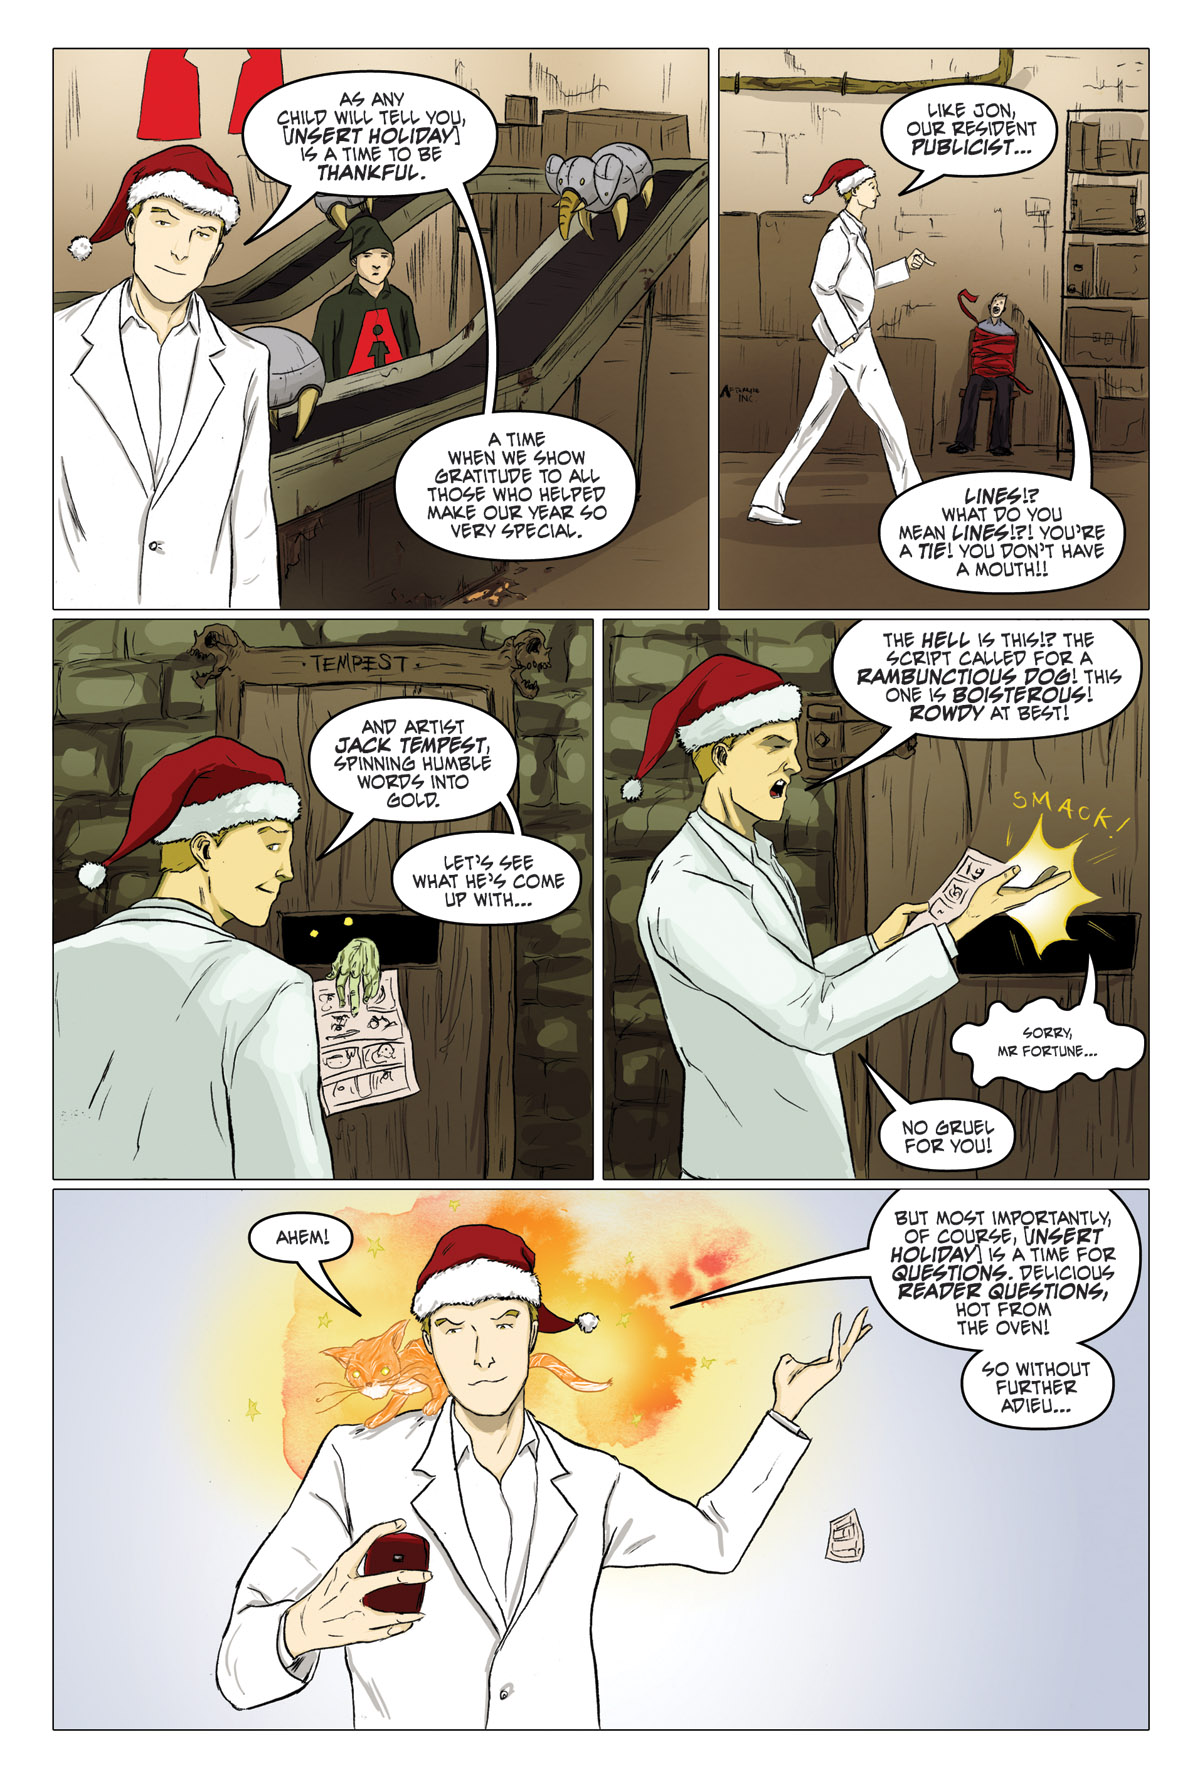 Afterlife Inc. | Holiday Special 2011 | Page 2